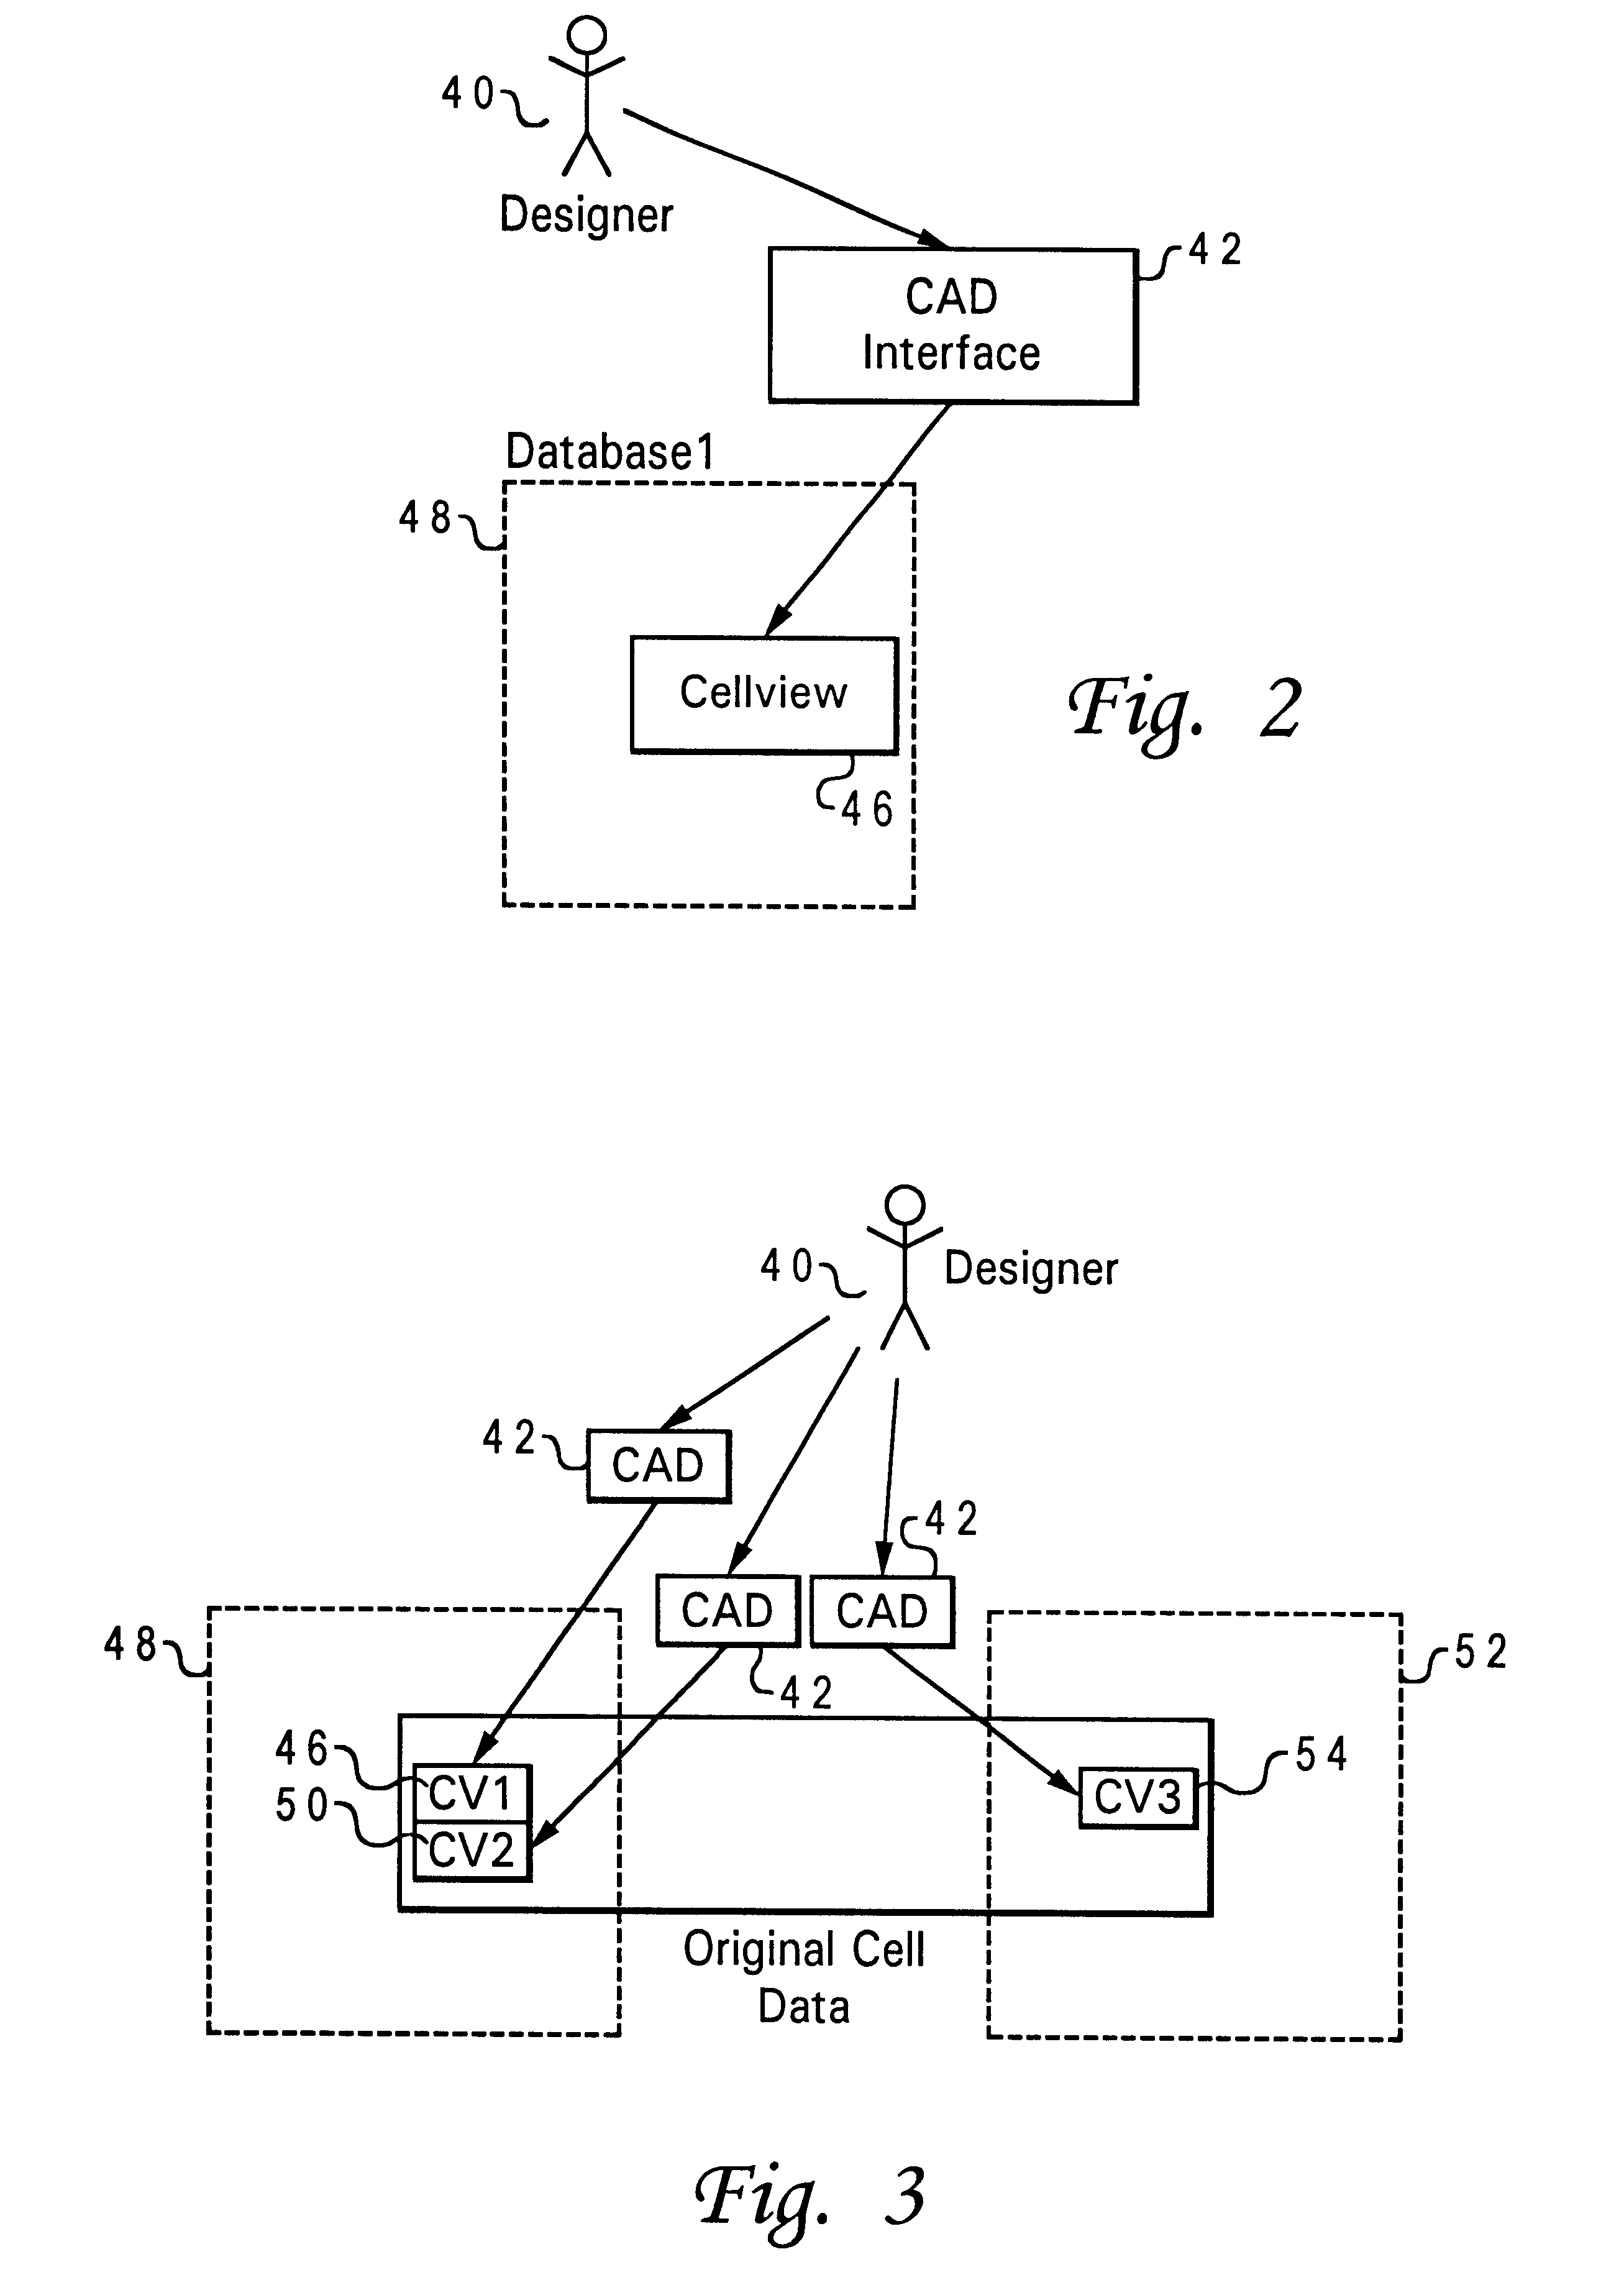 Method and system for automatically maintaining data consistency across various databases